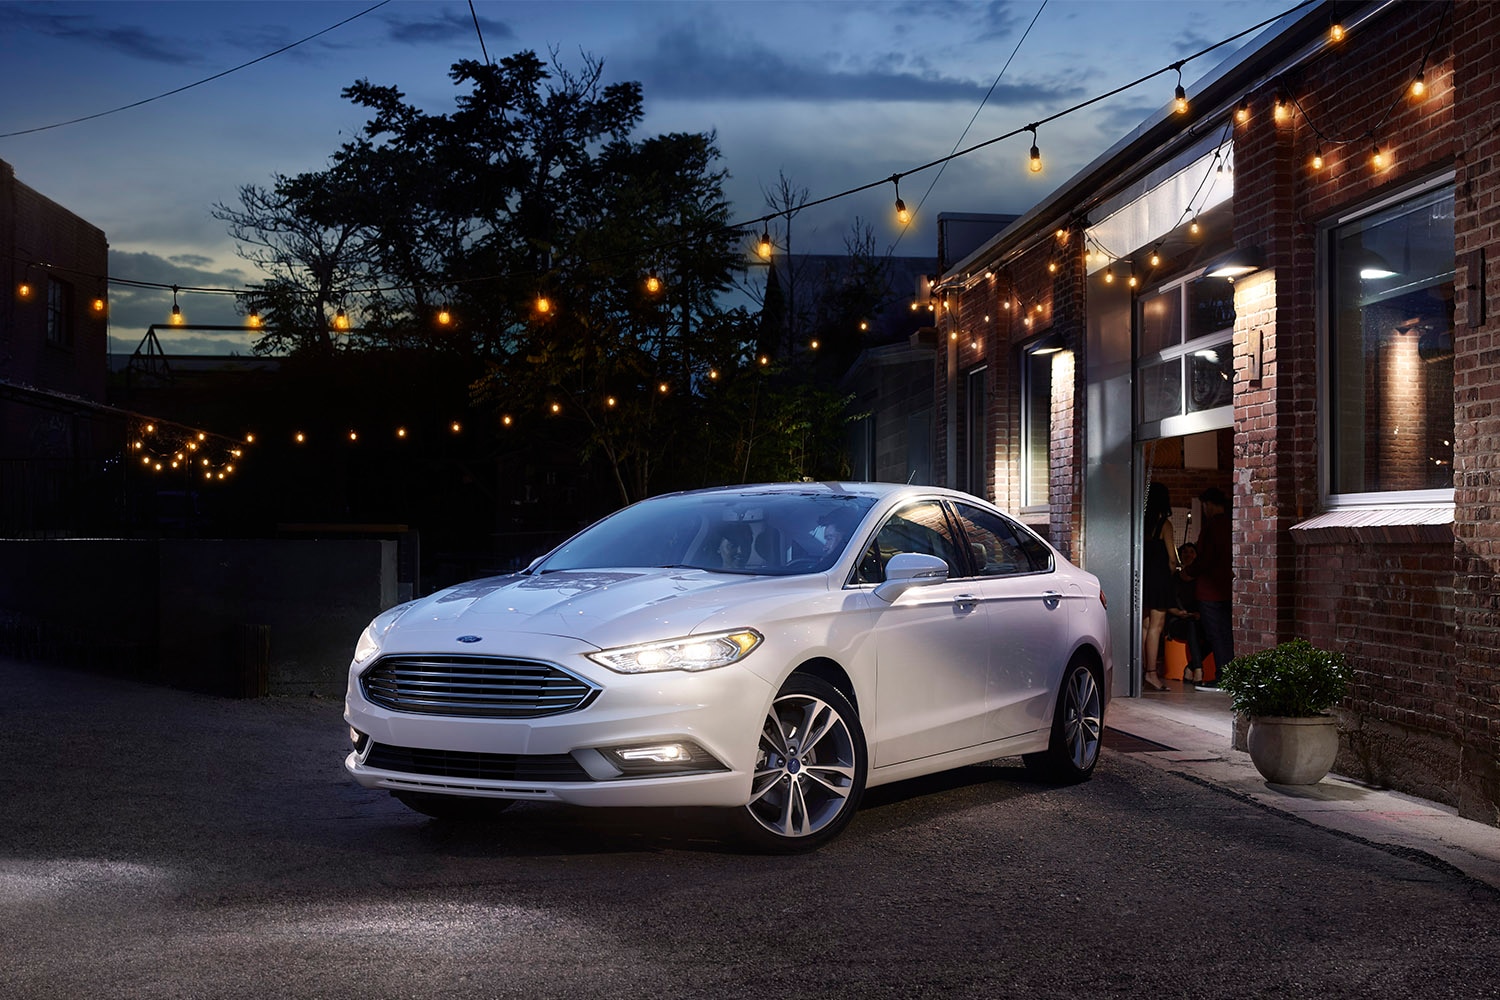 2018 Ford Fusion Hybrid: One of Capital One's 10 Best Road Trip Vehicles, According to Science